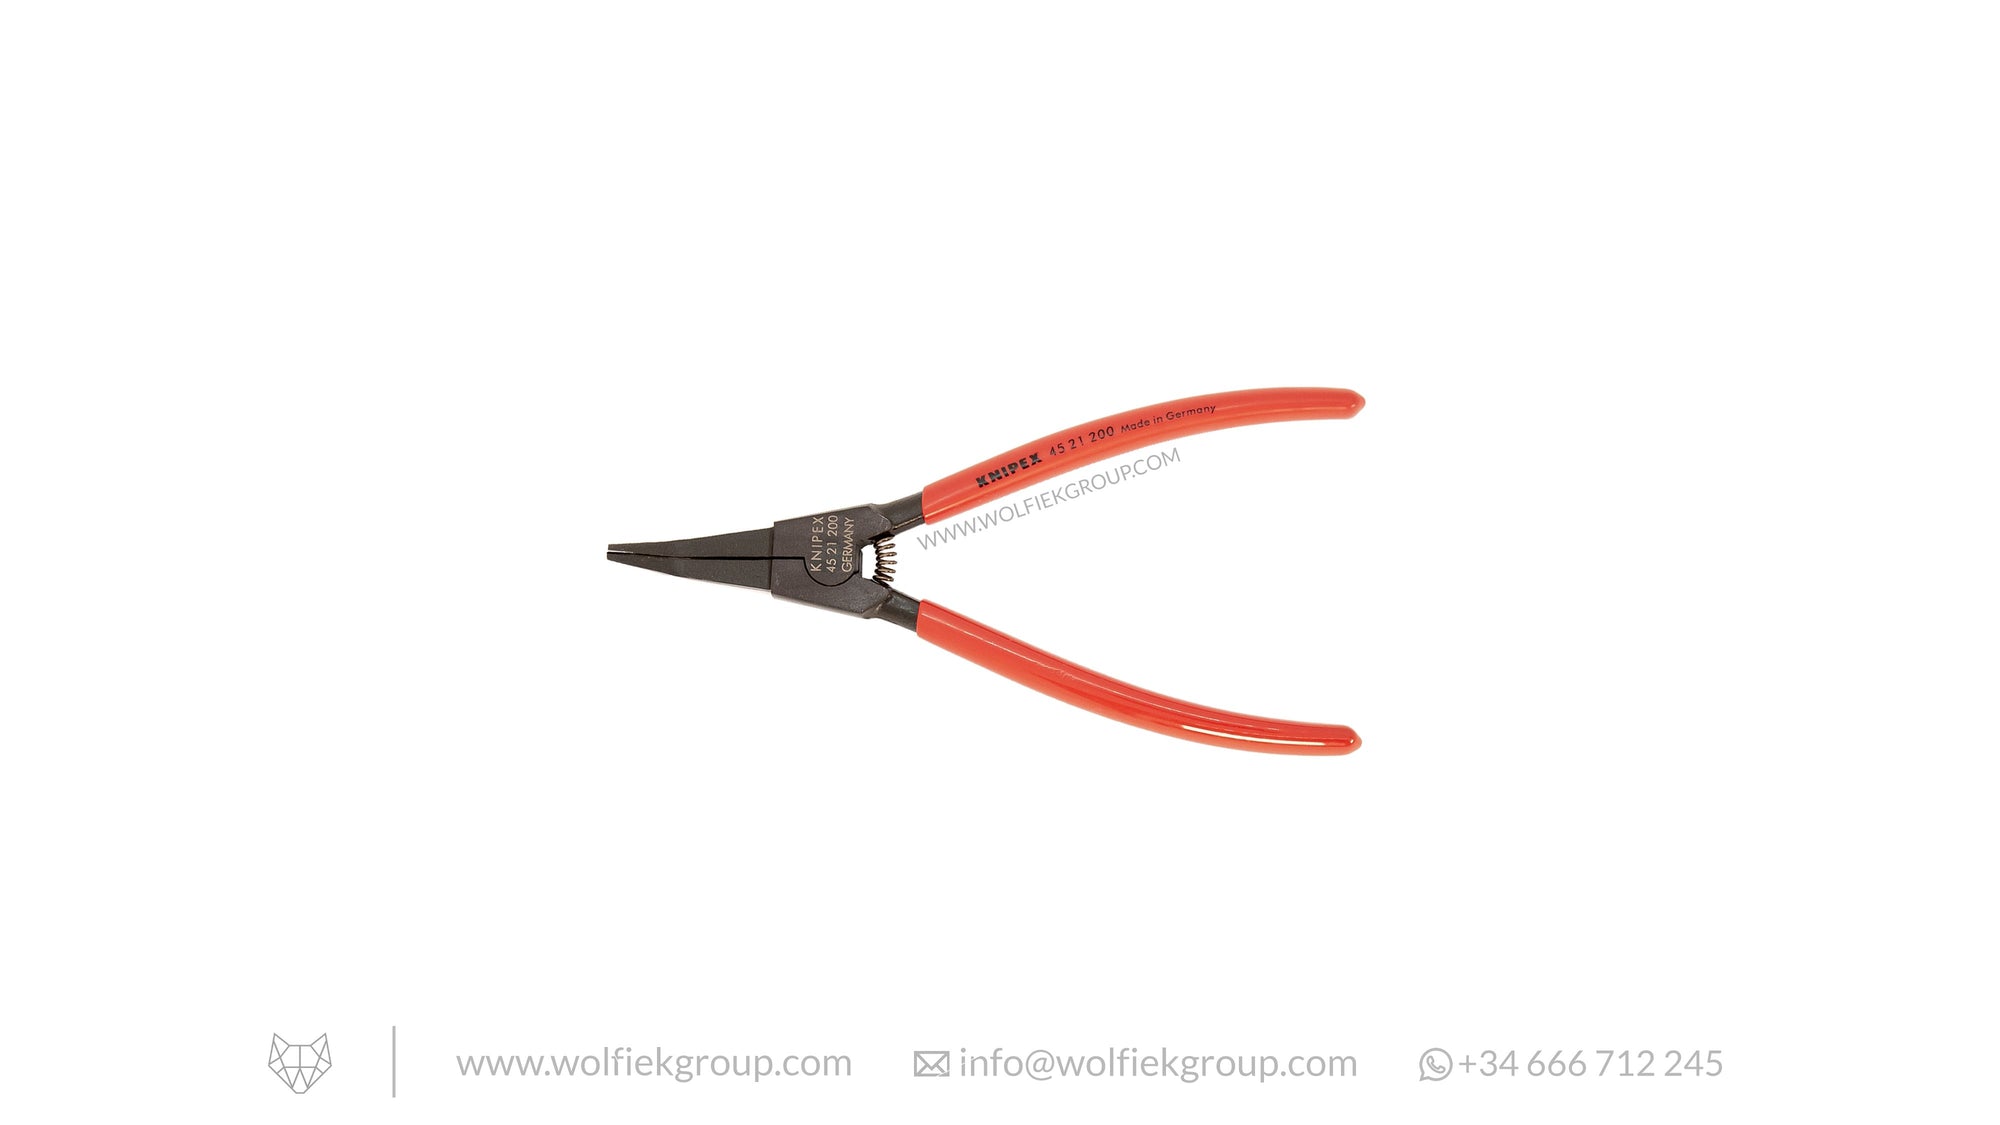 Knipex special retaining ring pliers